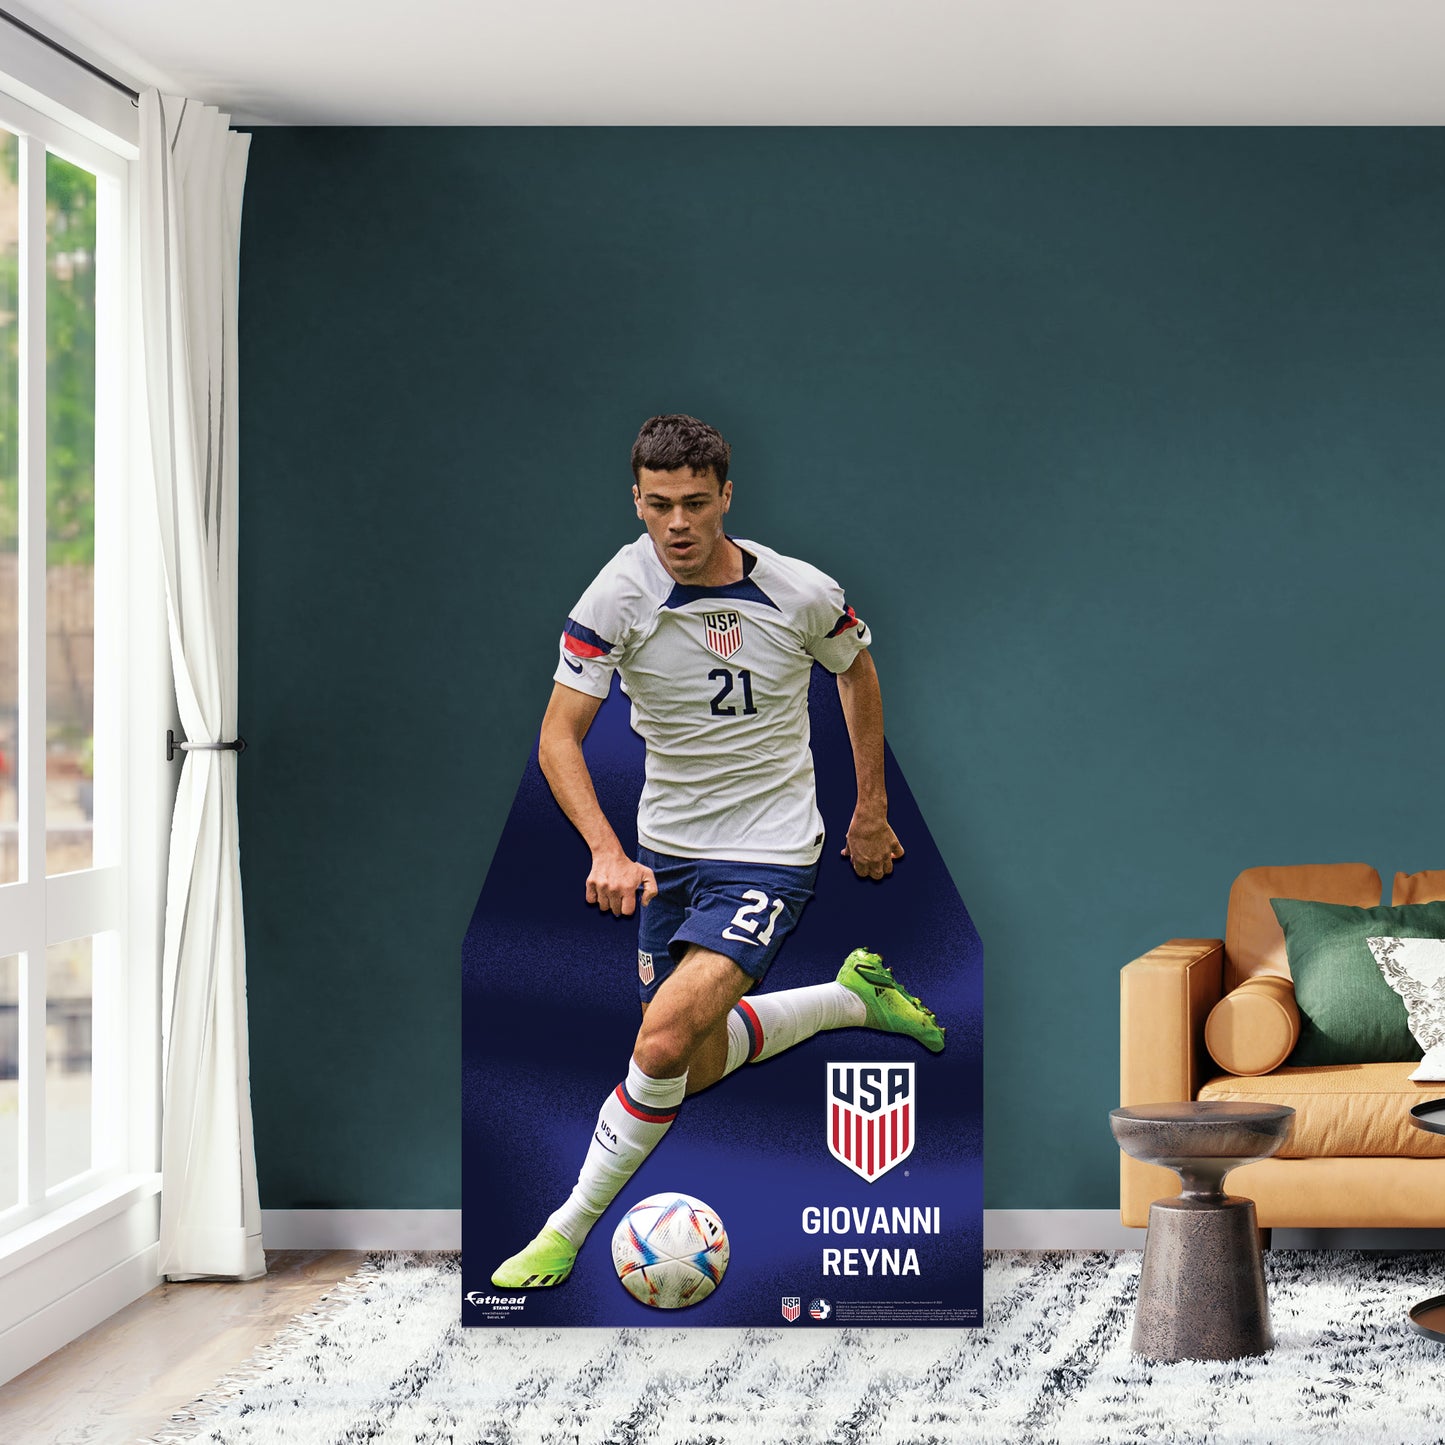 Giovanni Reyna   Life-Size   Foam Core Cutout  - Officially Licensed USMNT    Stand Out